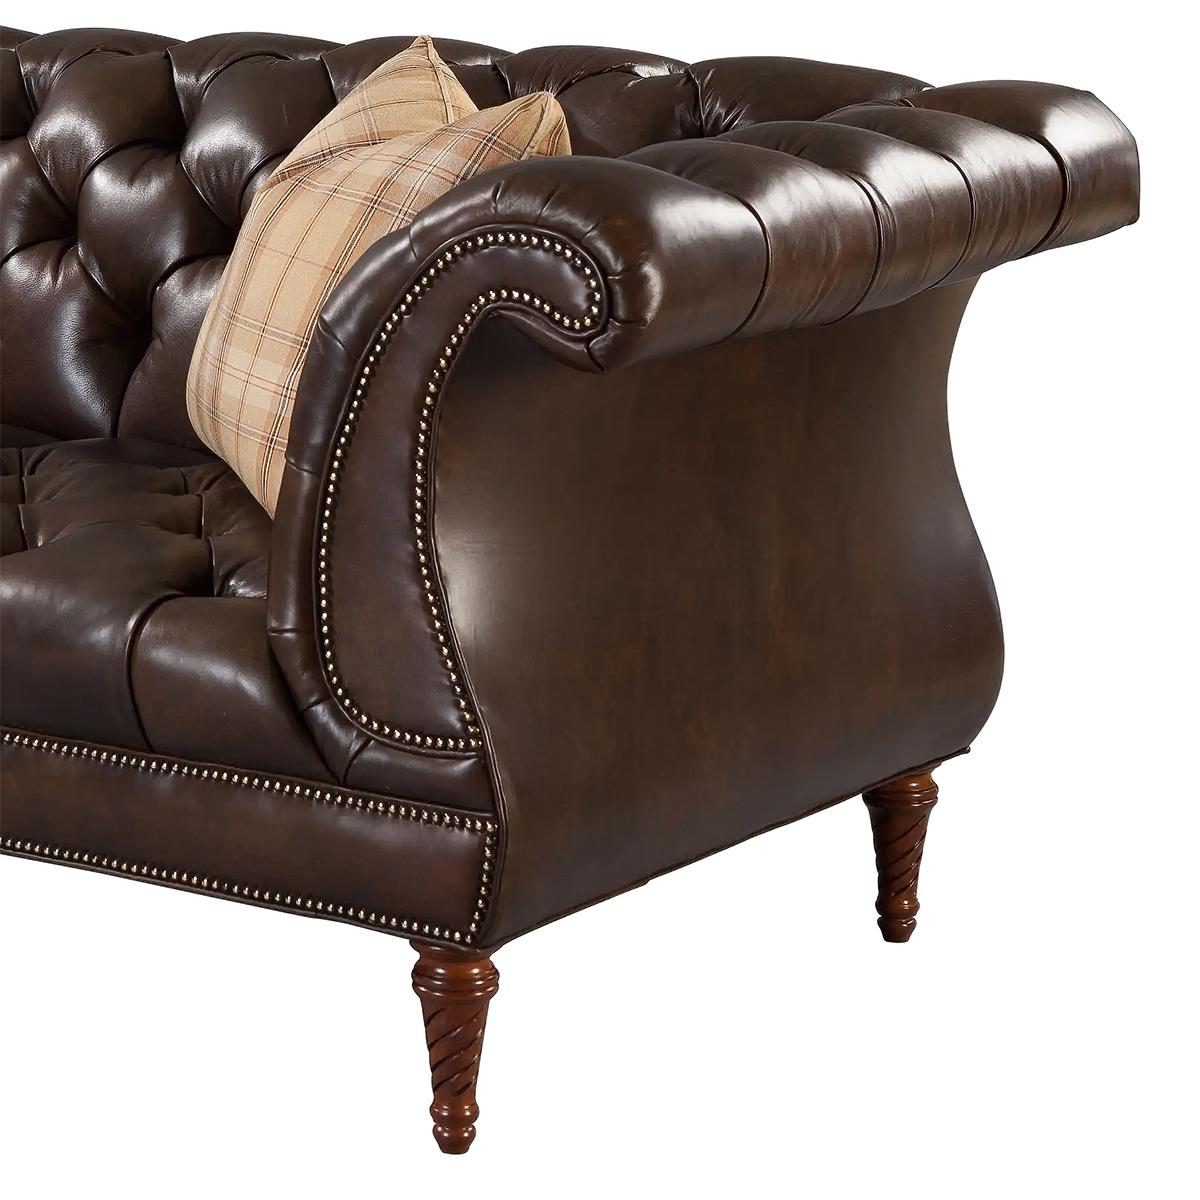 Regency style tufted lyre sofa a deep button upholstered lyre form sofa, the over scrolled back and arms on tapering and spiral carved legs.

Solid maple frame with 8-way hand-tied cushions.
Shown in standard polished finish with nailhead